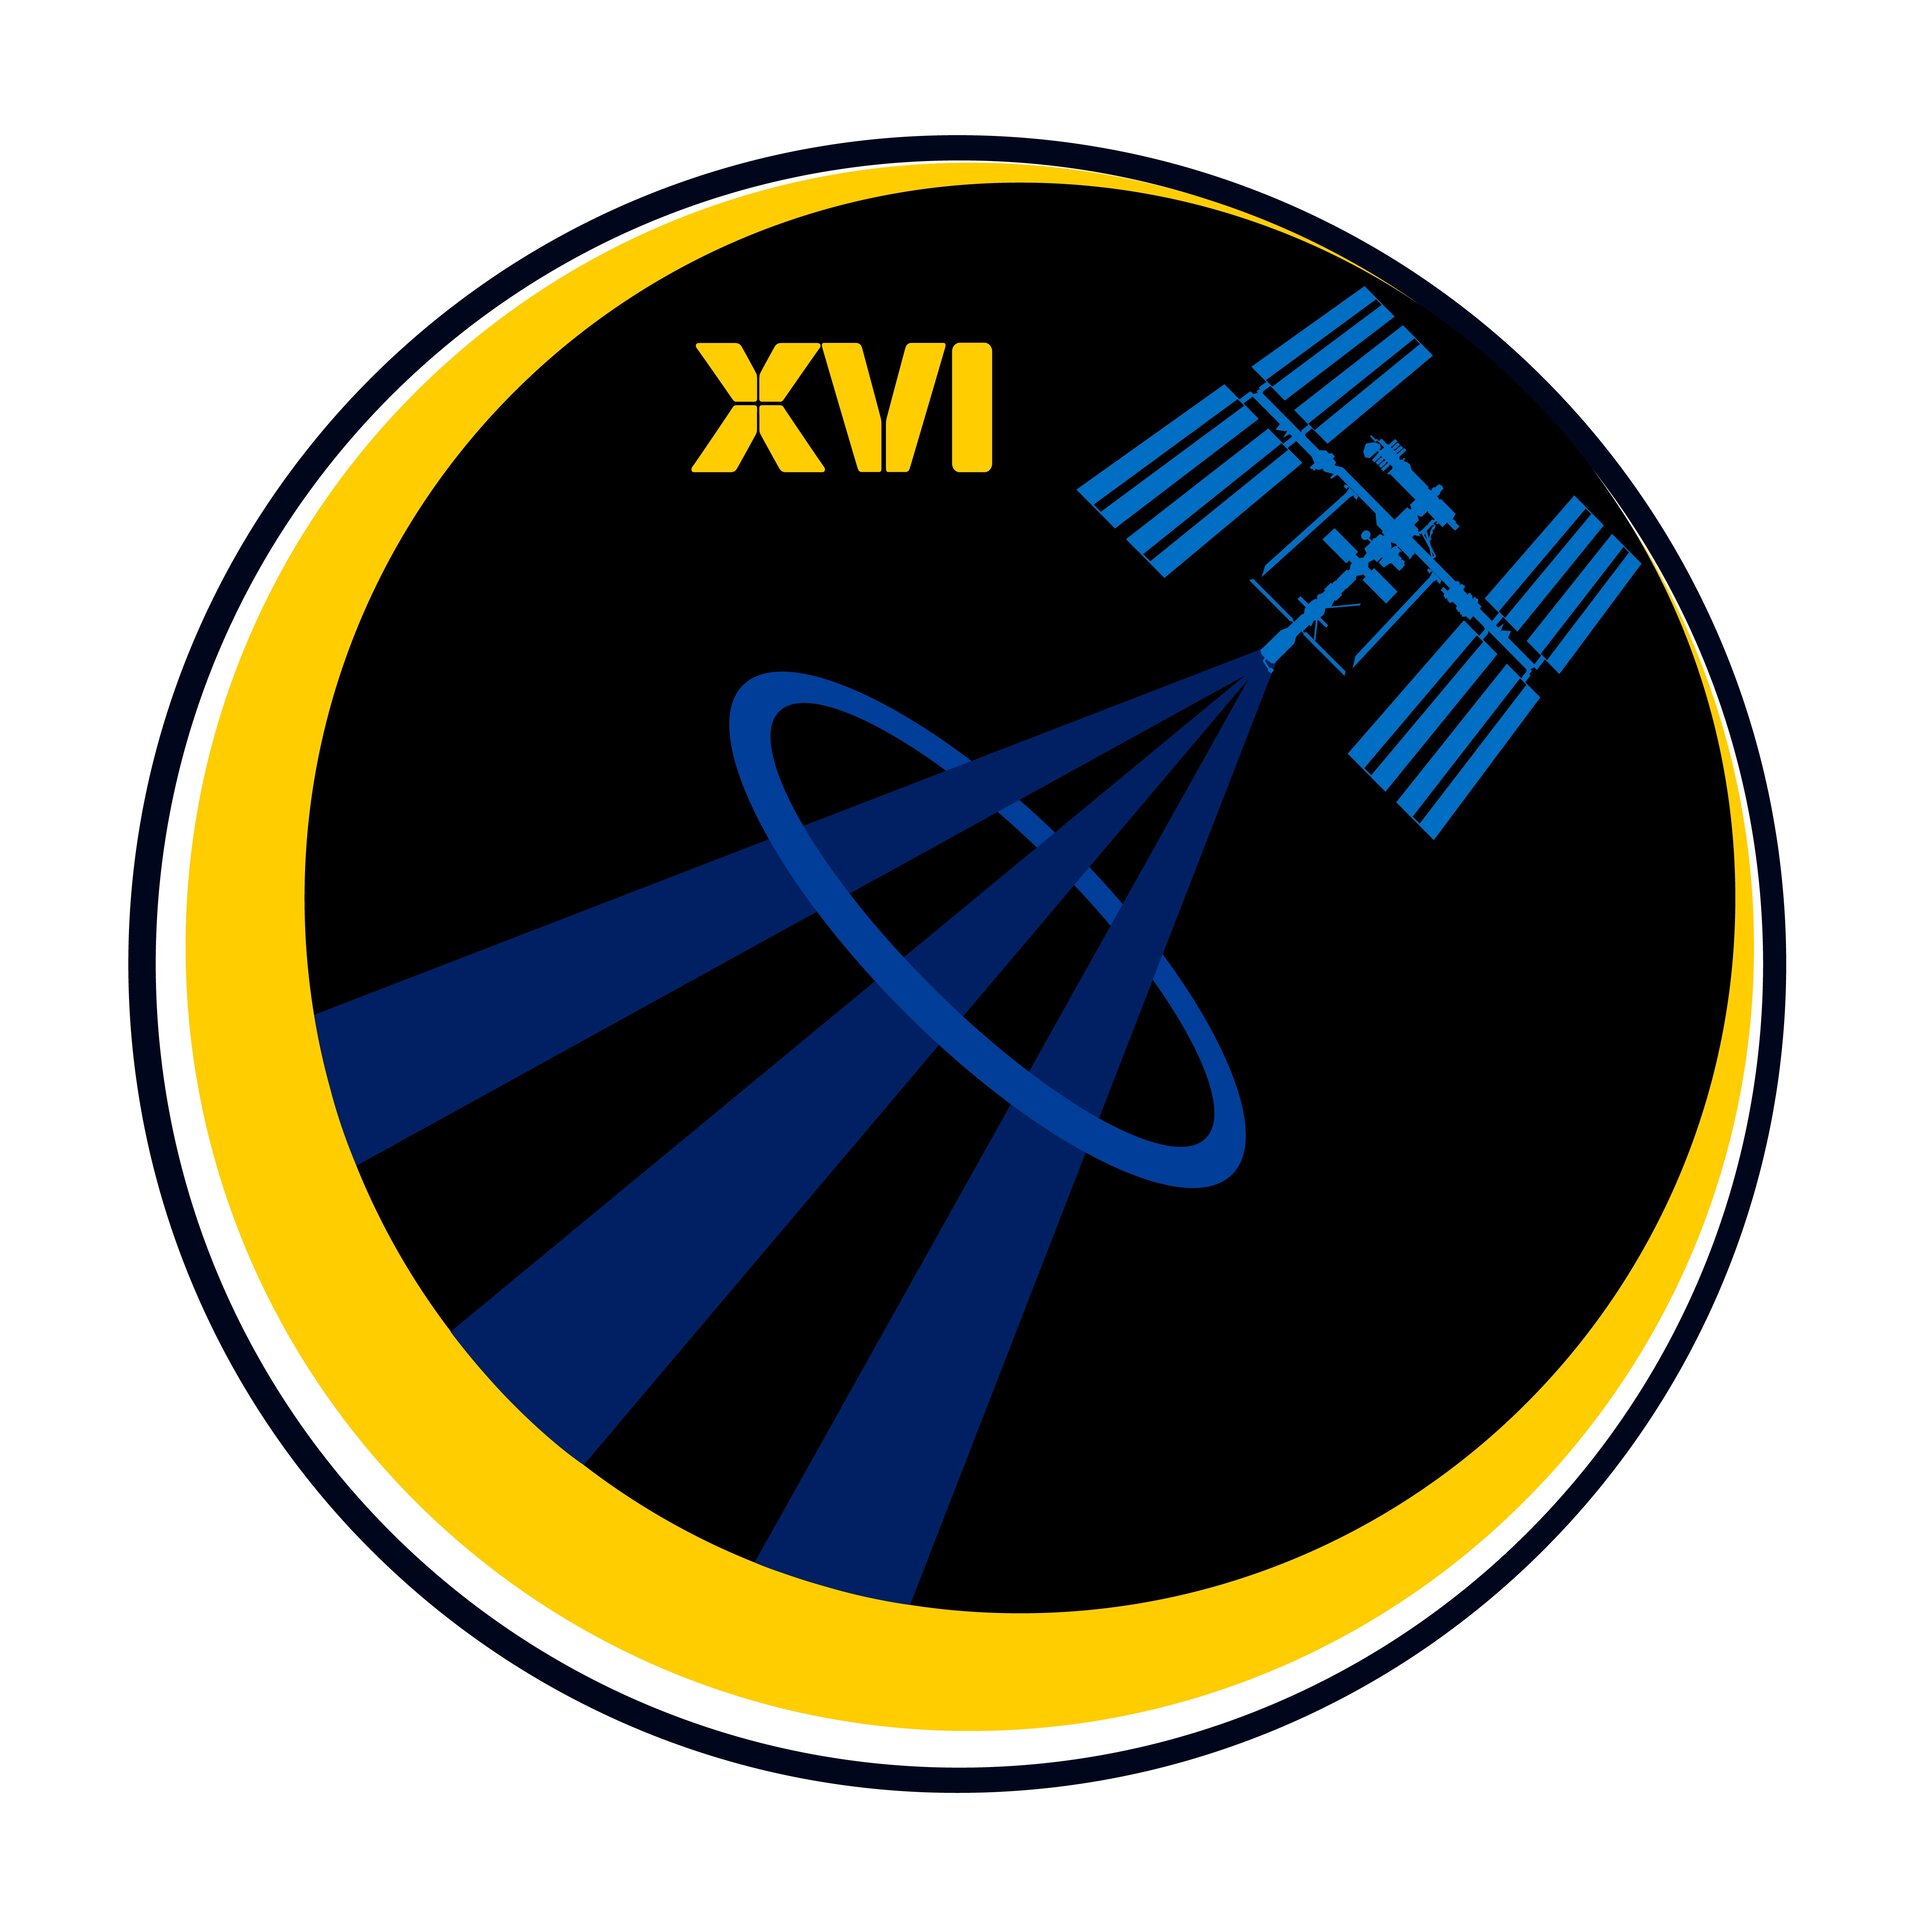 ISS Expedition 16 patch, 2008